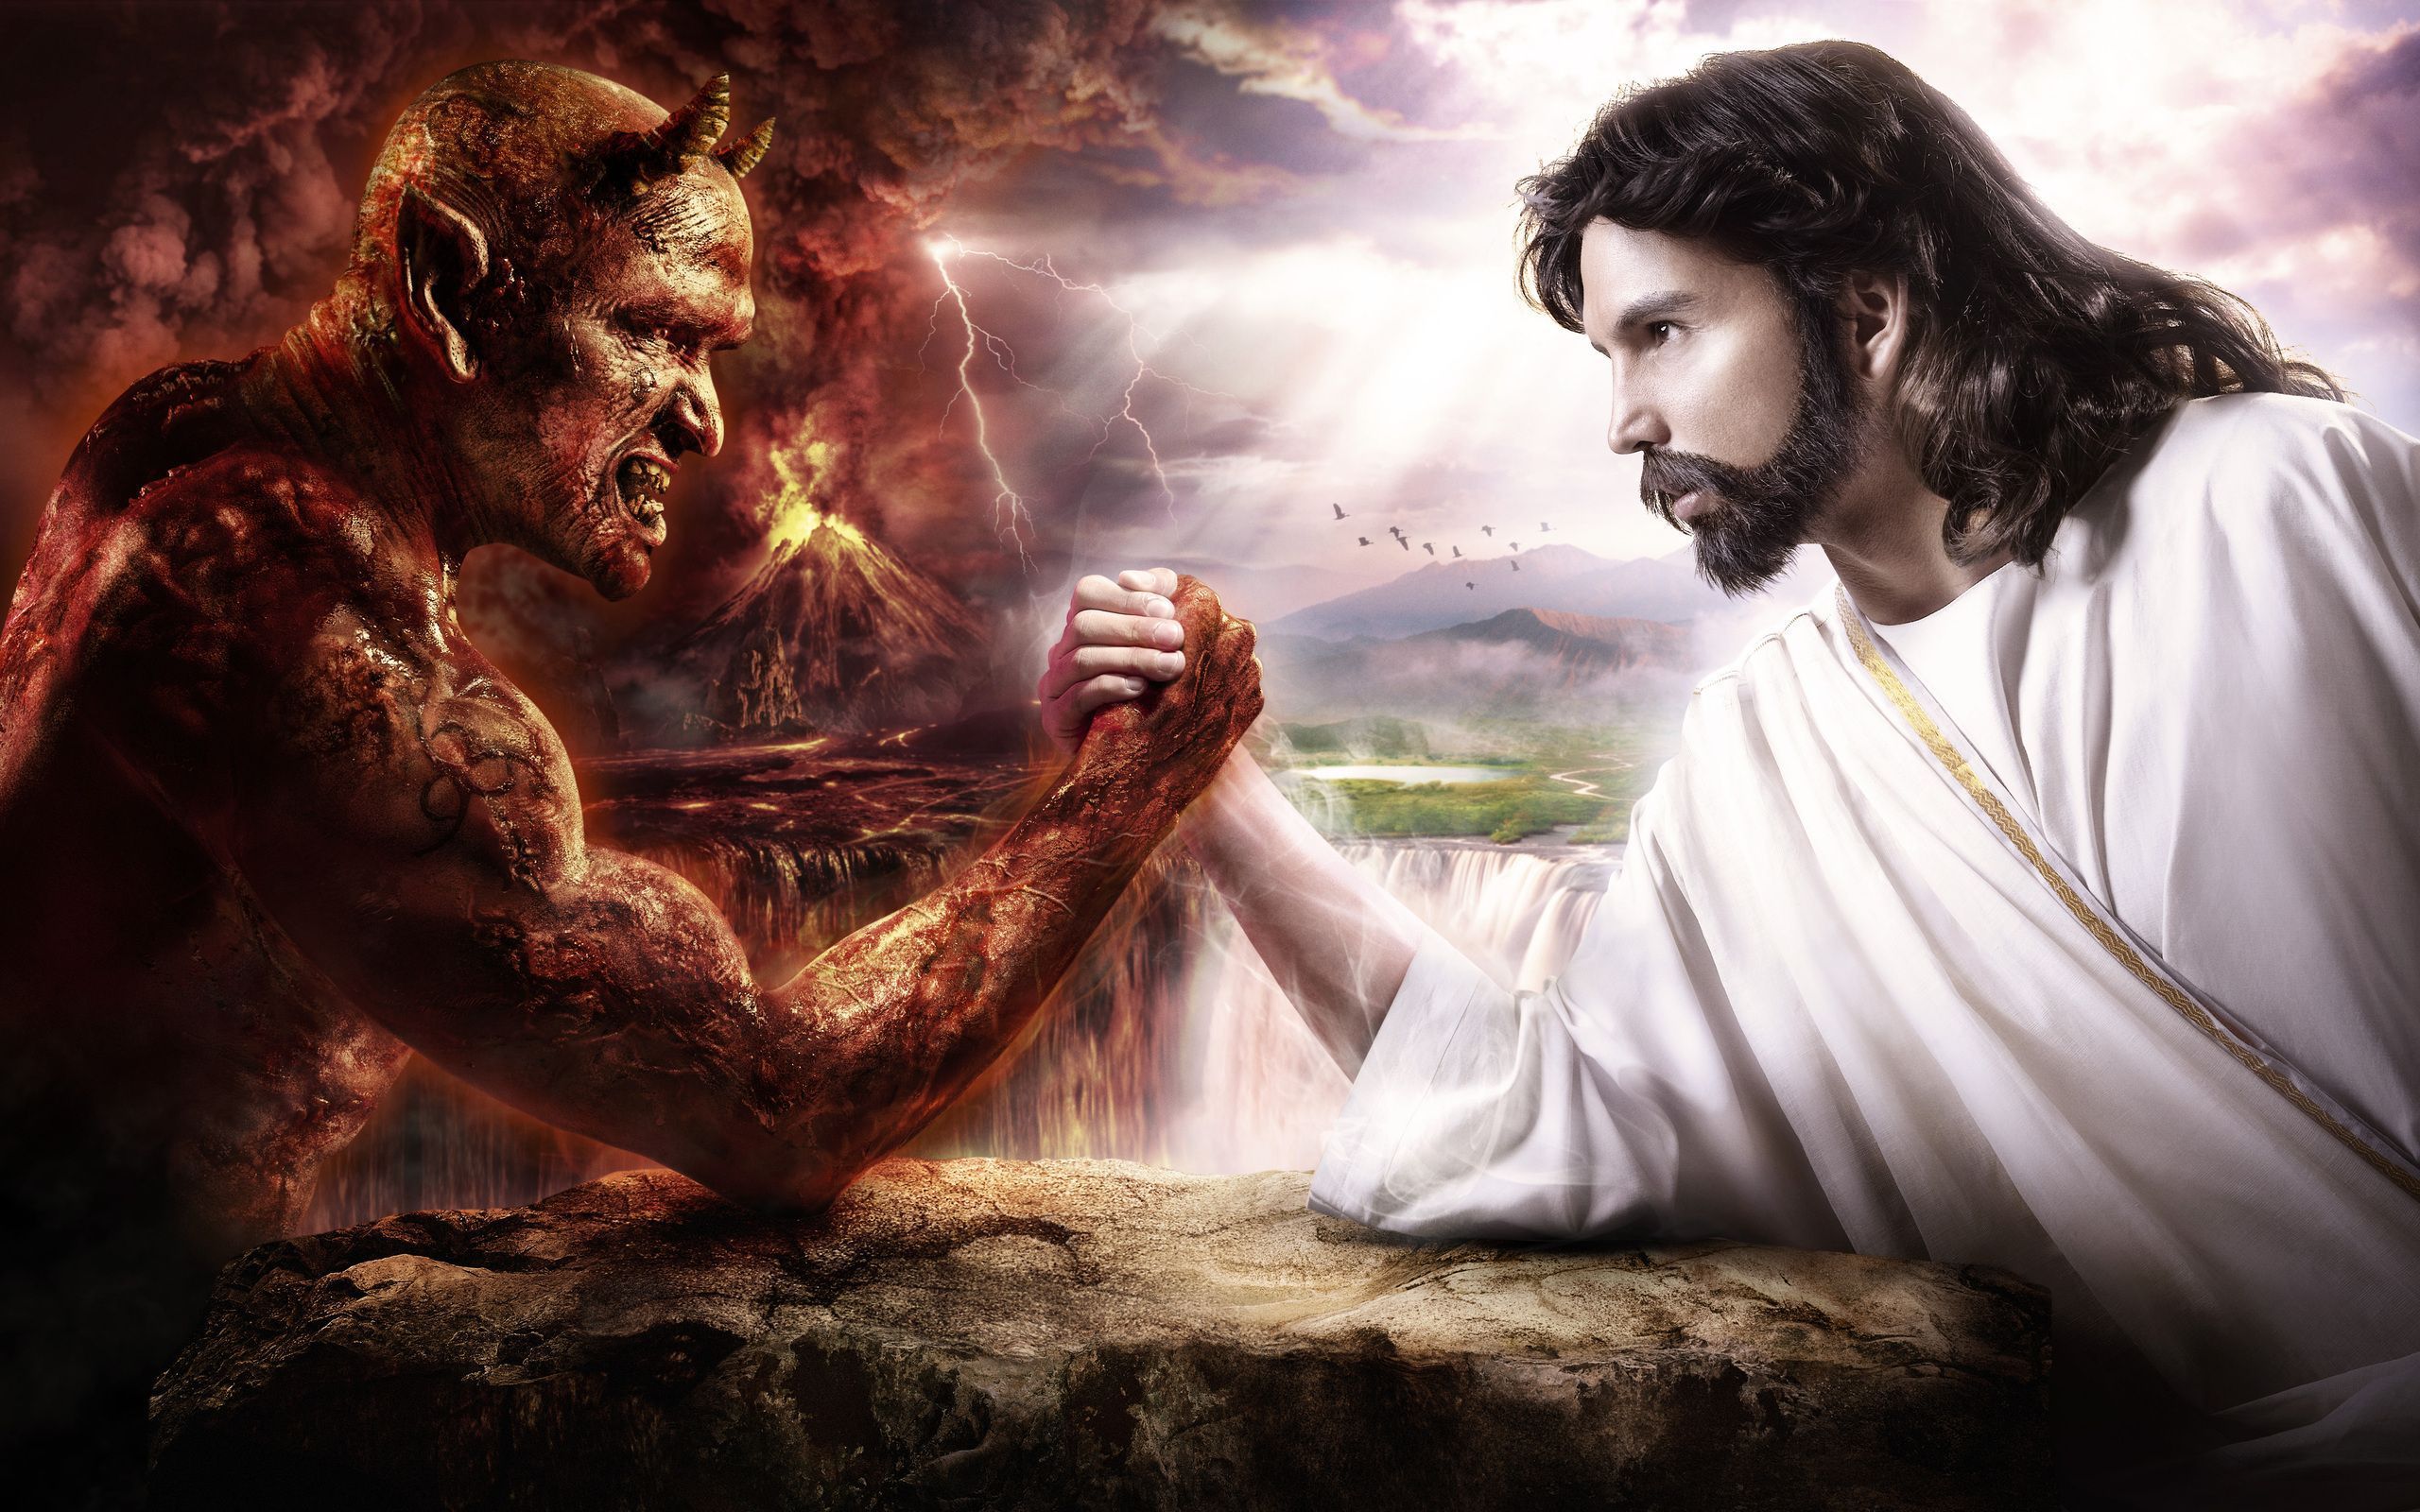 Devil vs God wallpapers and images - wallpapers, pictures, photos